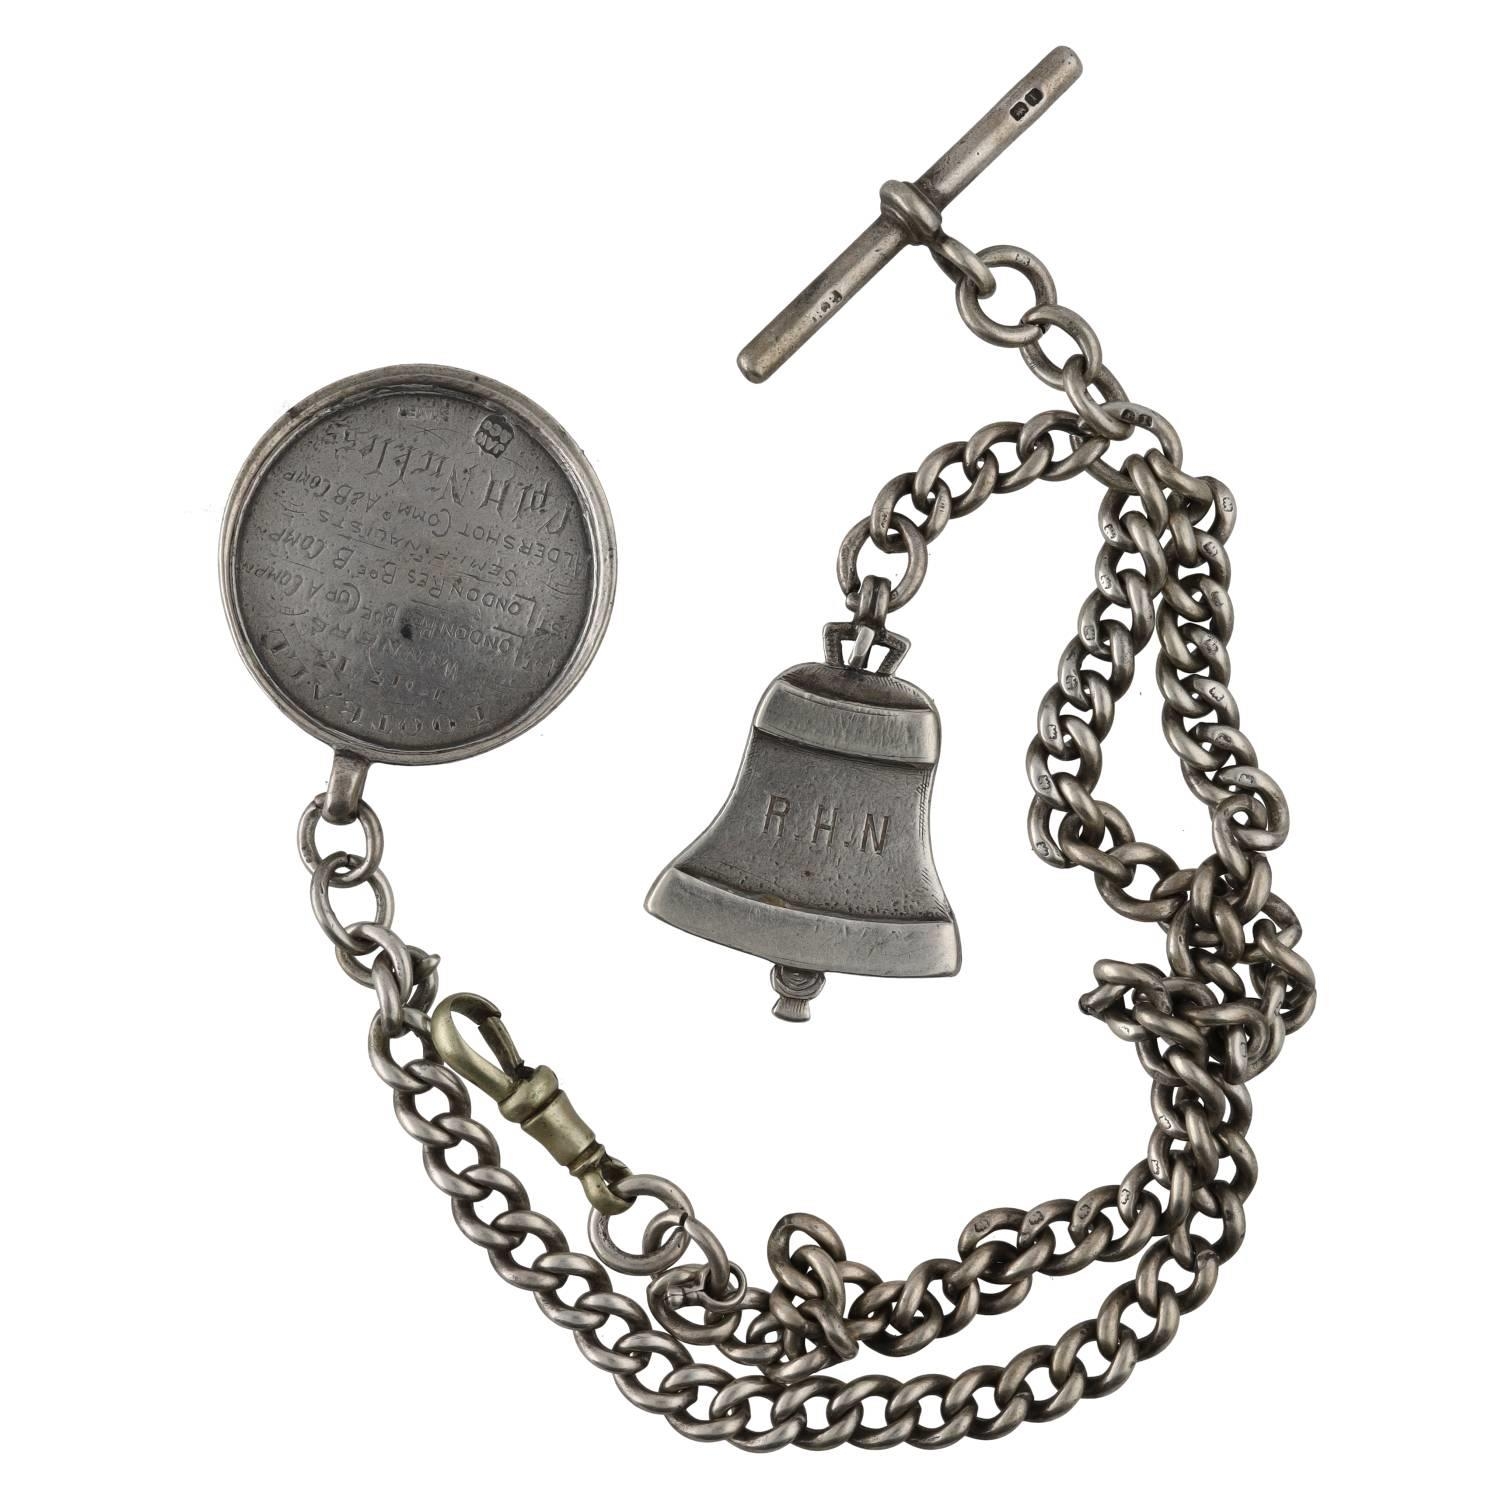 Silver curb link double watch Albert chain, with silver T-bar, silver bell fob engraved 'R.H.N',